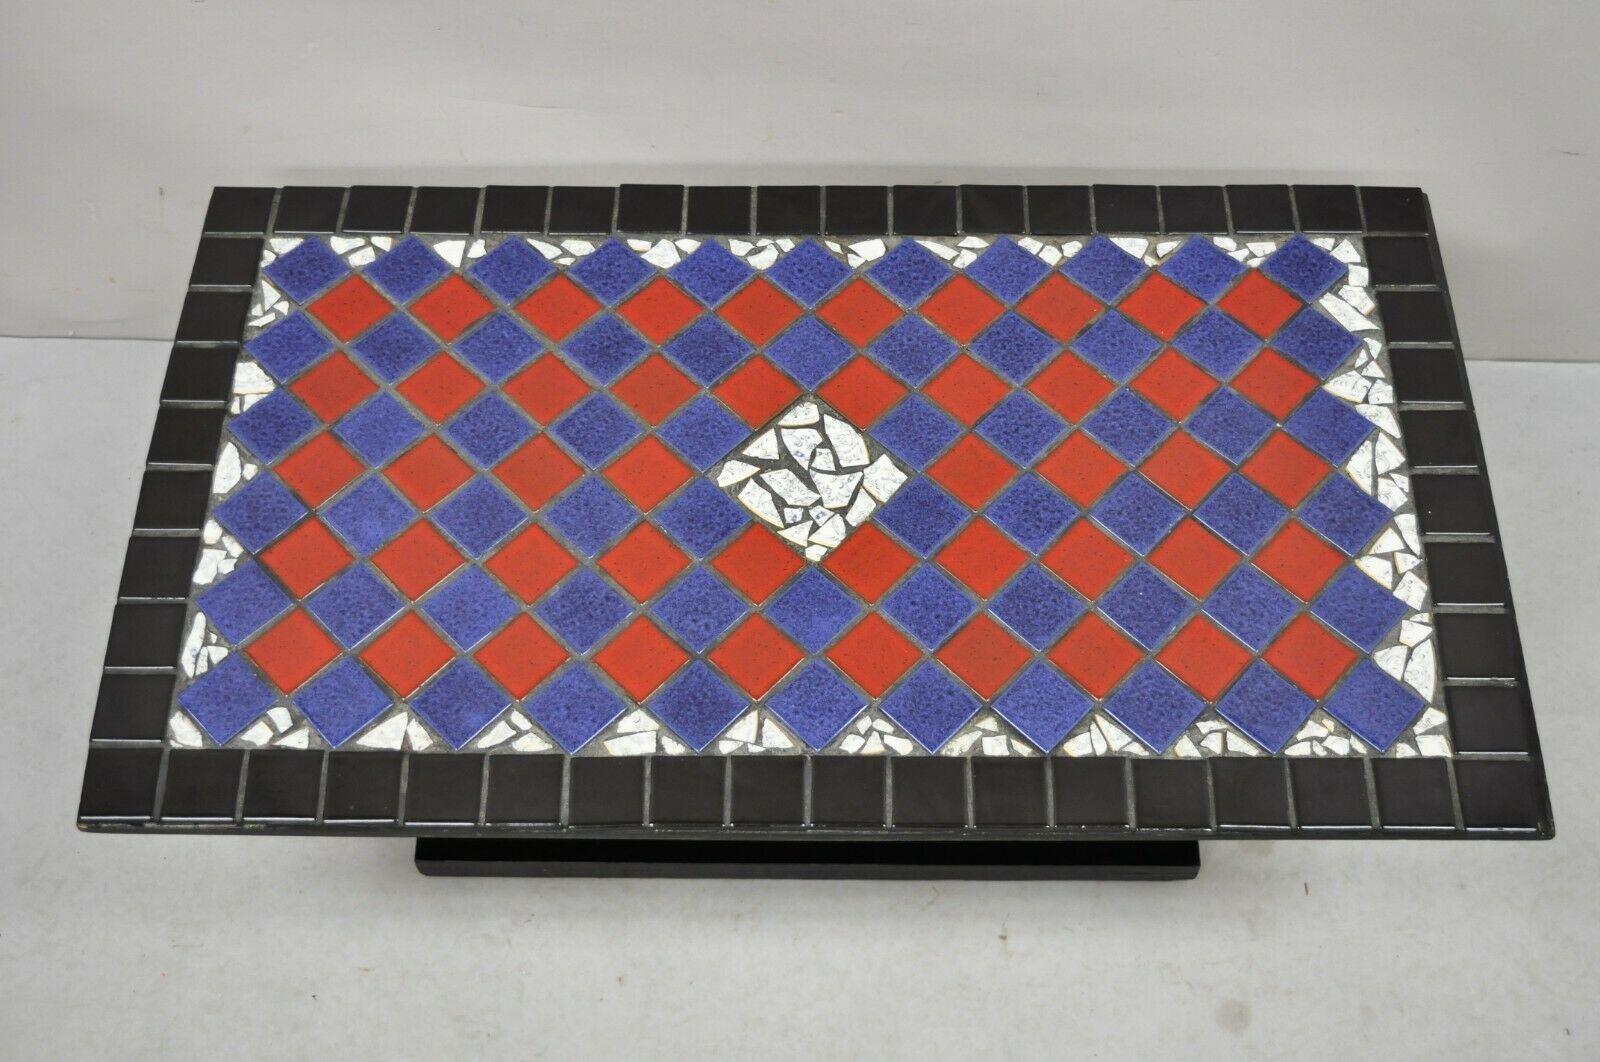 Vintage Art Deco blue and red Mosaic Tile Top Arch base coffee table. Item features a mosaic porcelain and ceramic tile top, arched pedestal base, very vintage item, great style and form. Circa Early to Mid 1900s. Measurements: 13.5